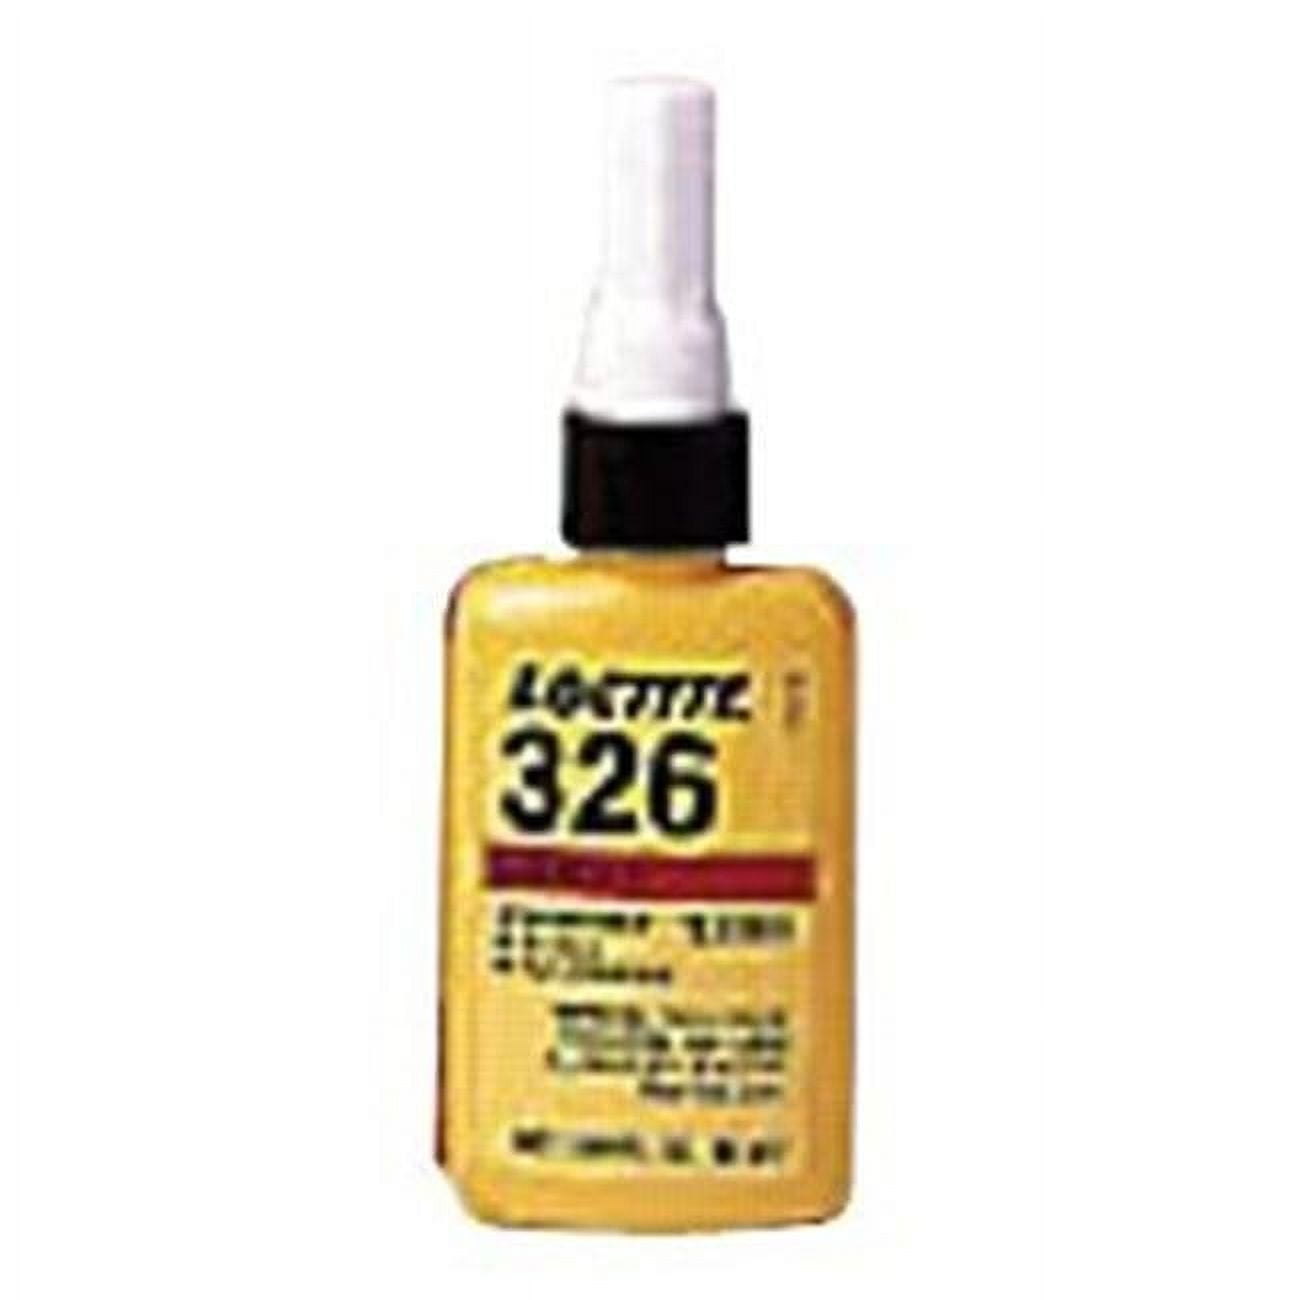 Loctite Spray Adhesive High Performance 200, 13.5 Ounce Spray Can, Clear, 6